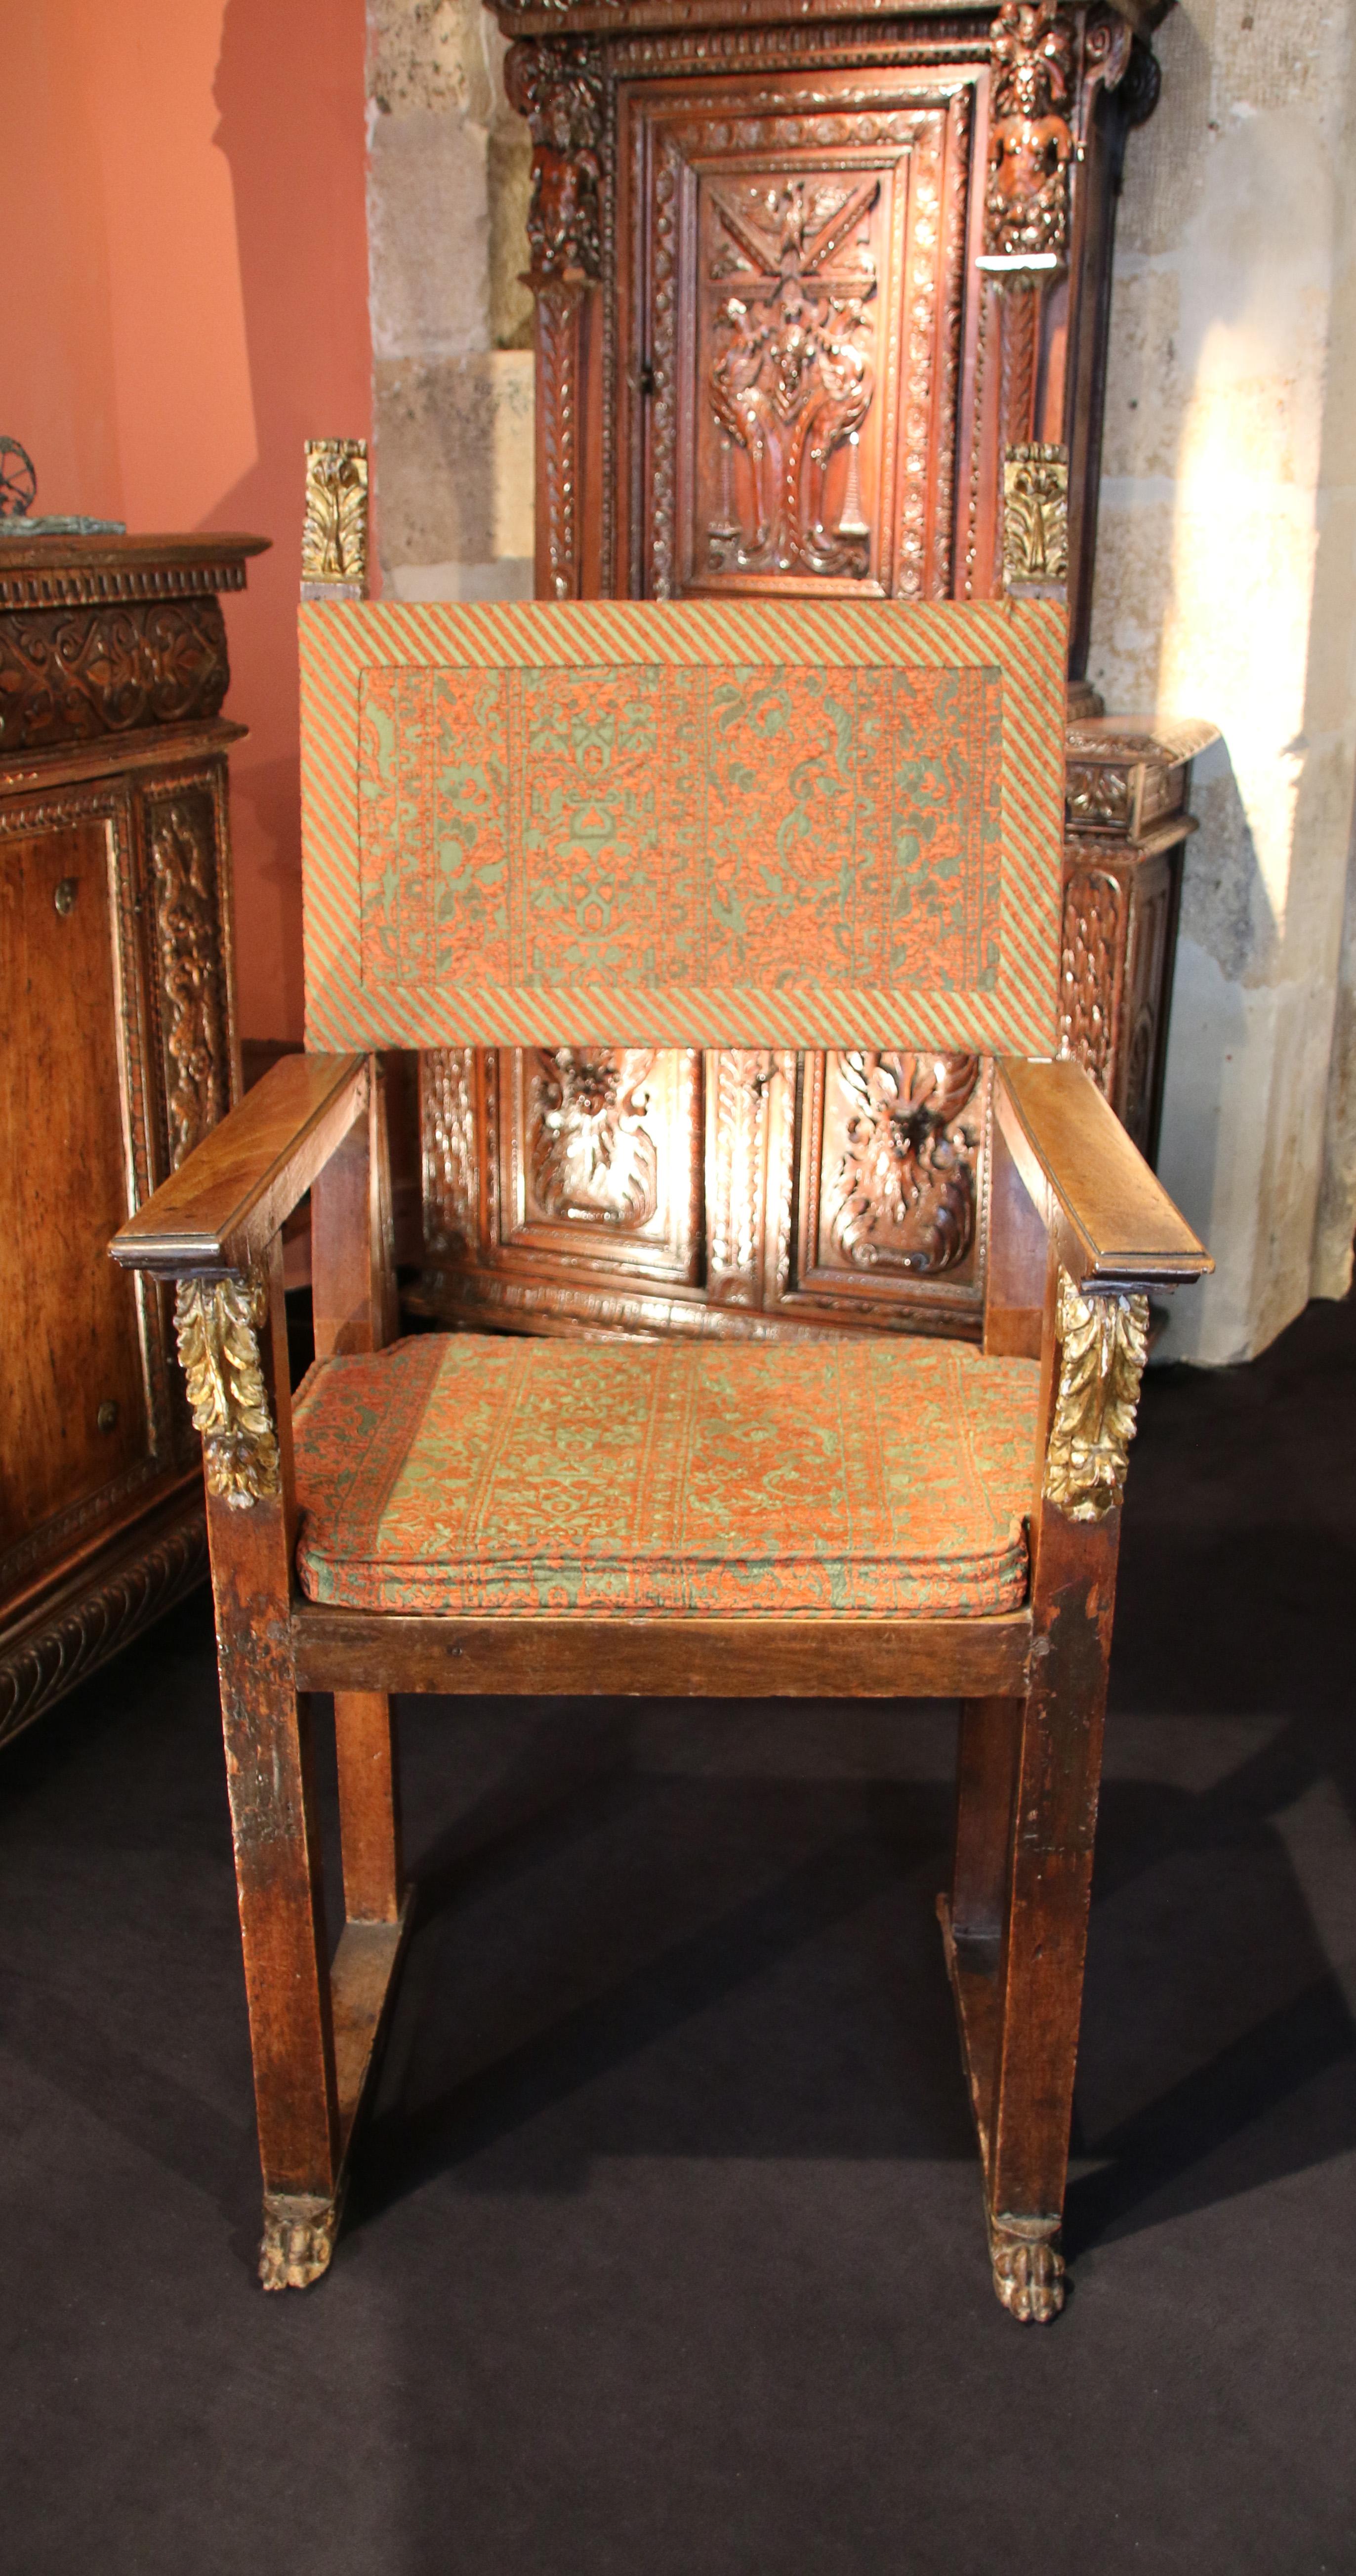 The straight uprights of the backrest are surmounted by gilded plumages. Gilded acanthus leaves in the form of consoles adorn the top of the two front legs, supporting the large flat armrests.
The straight legs are linked by two glides achieved by